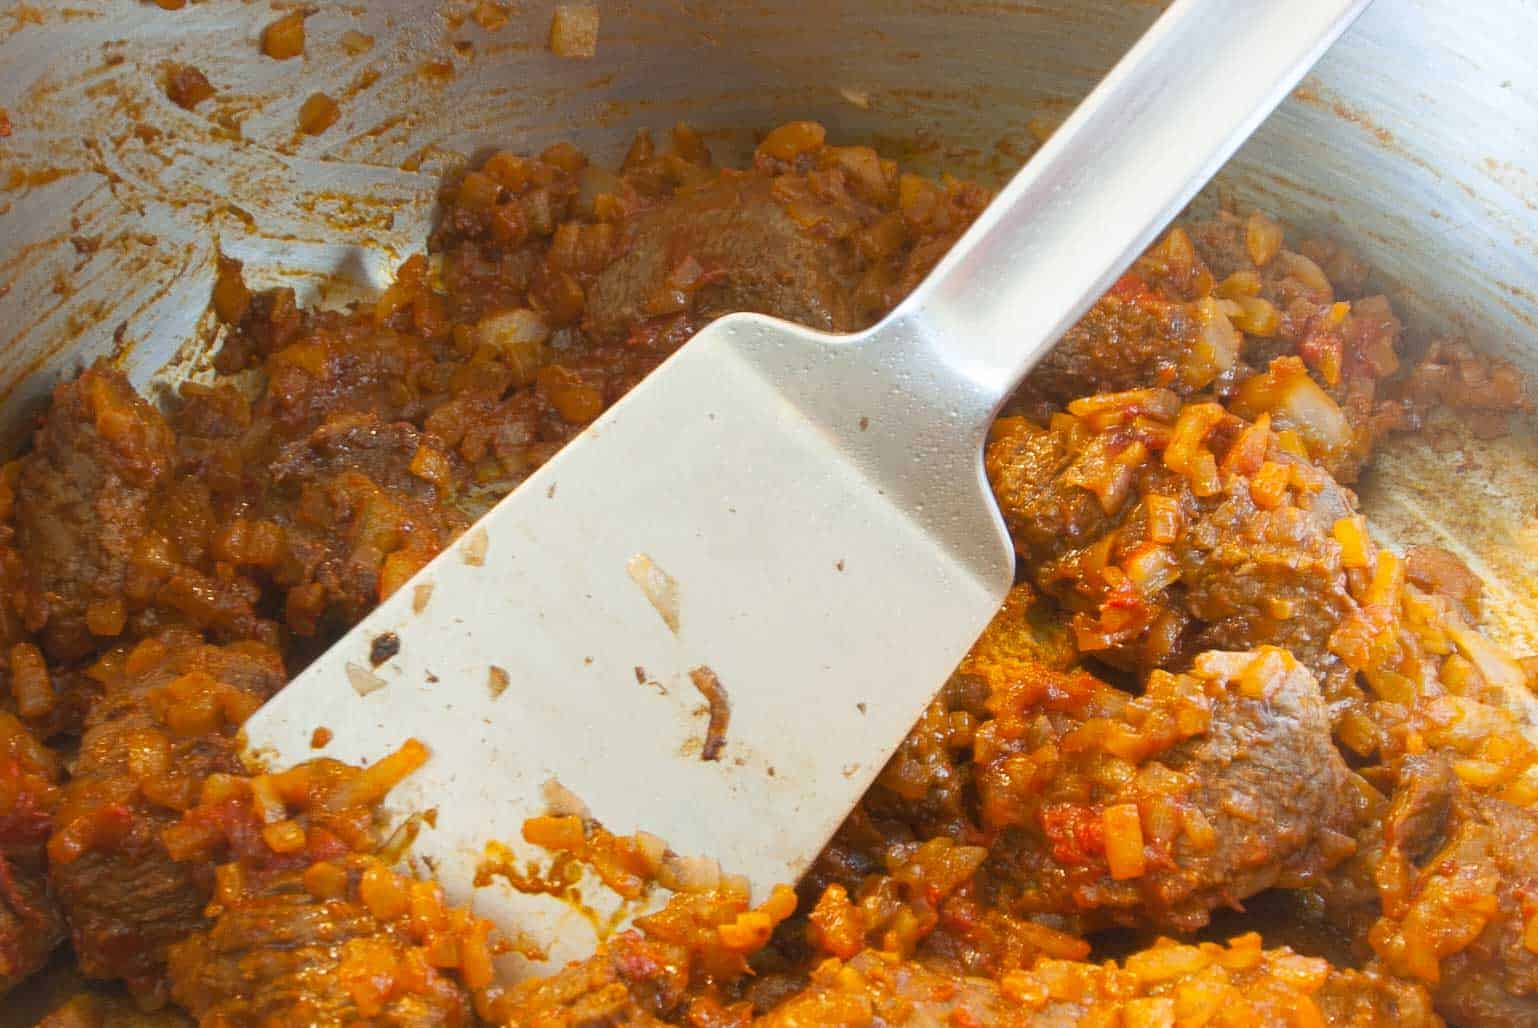 Beef goulash Roasted approach, that's how professional chefs and star chefs cook a beef goulash.